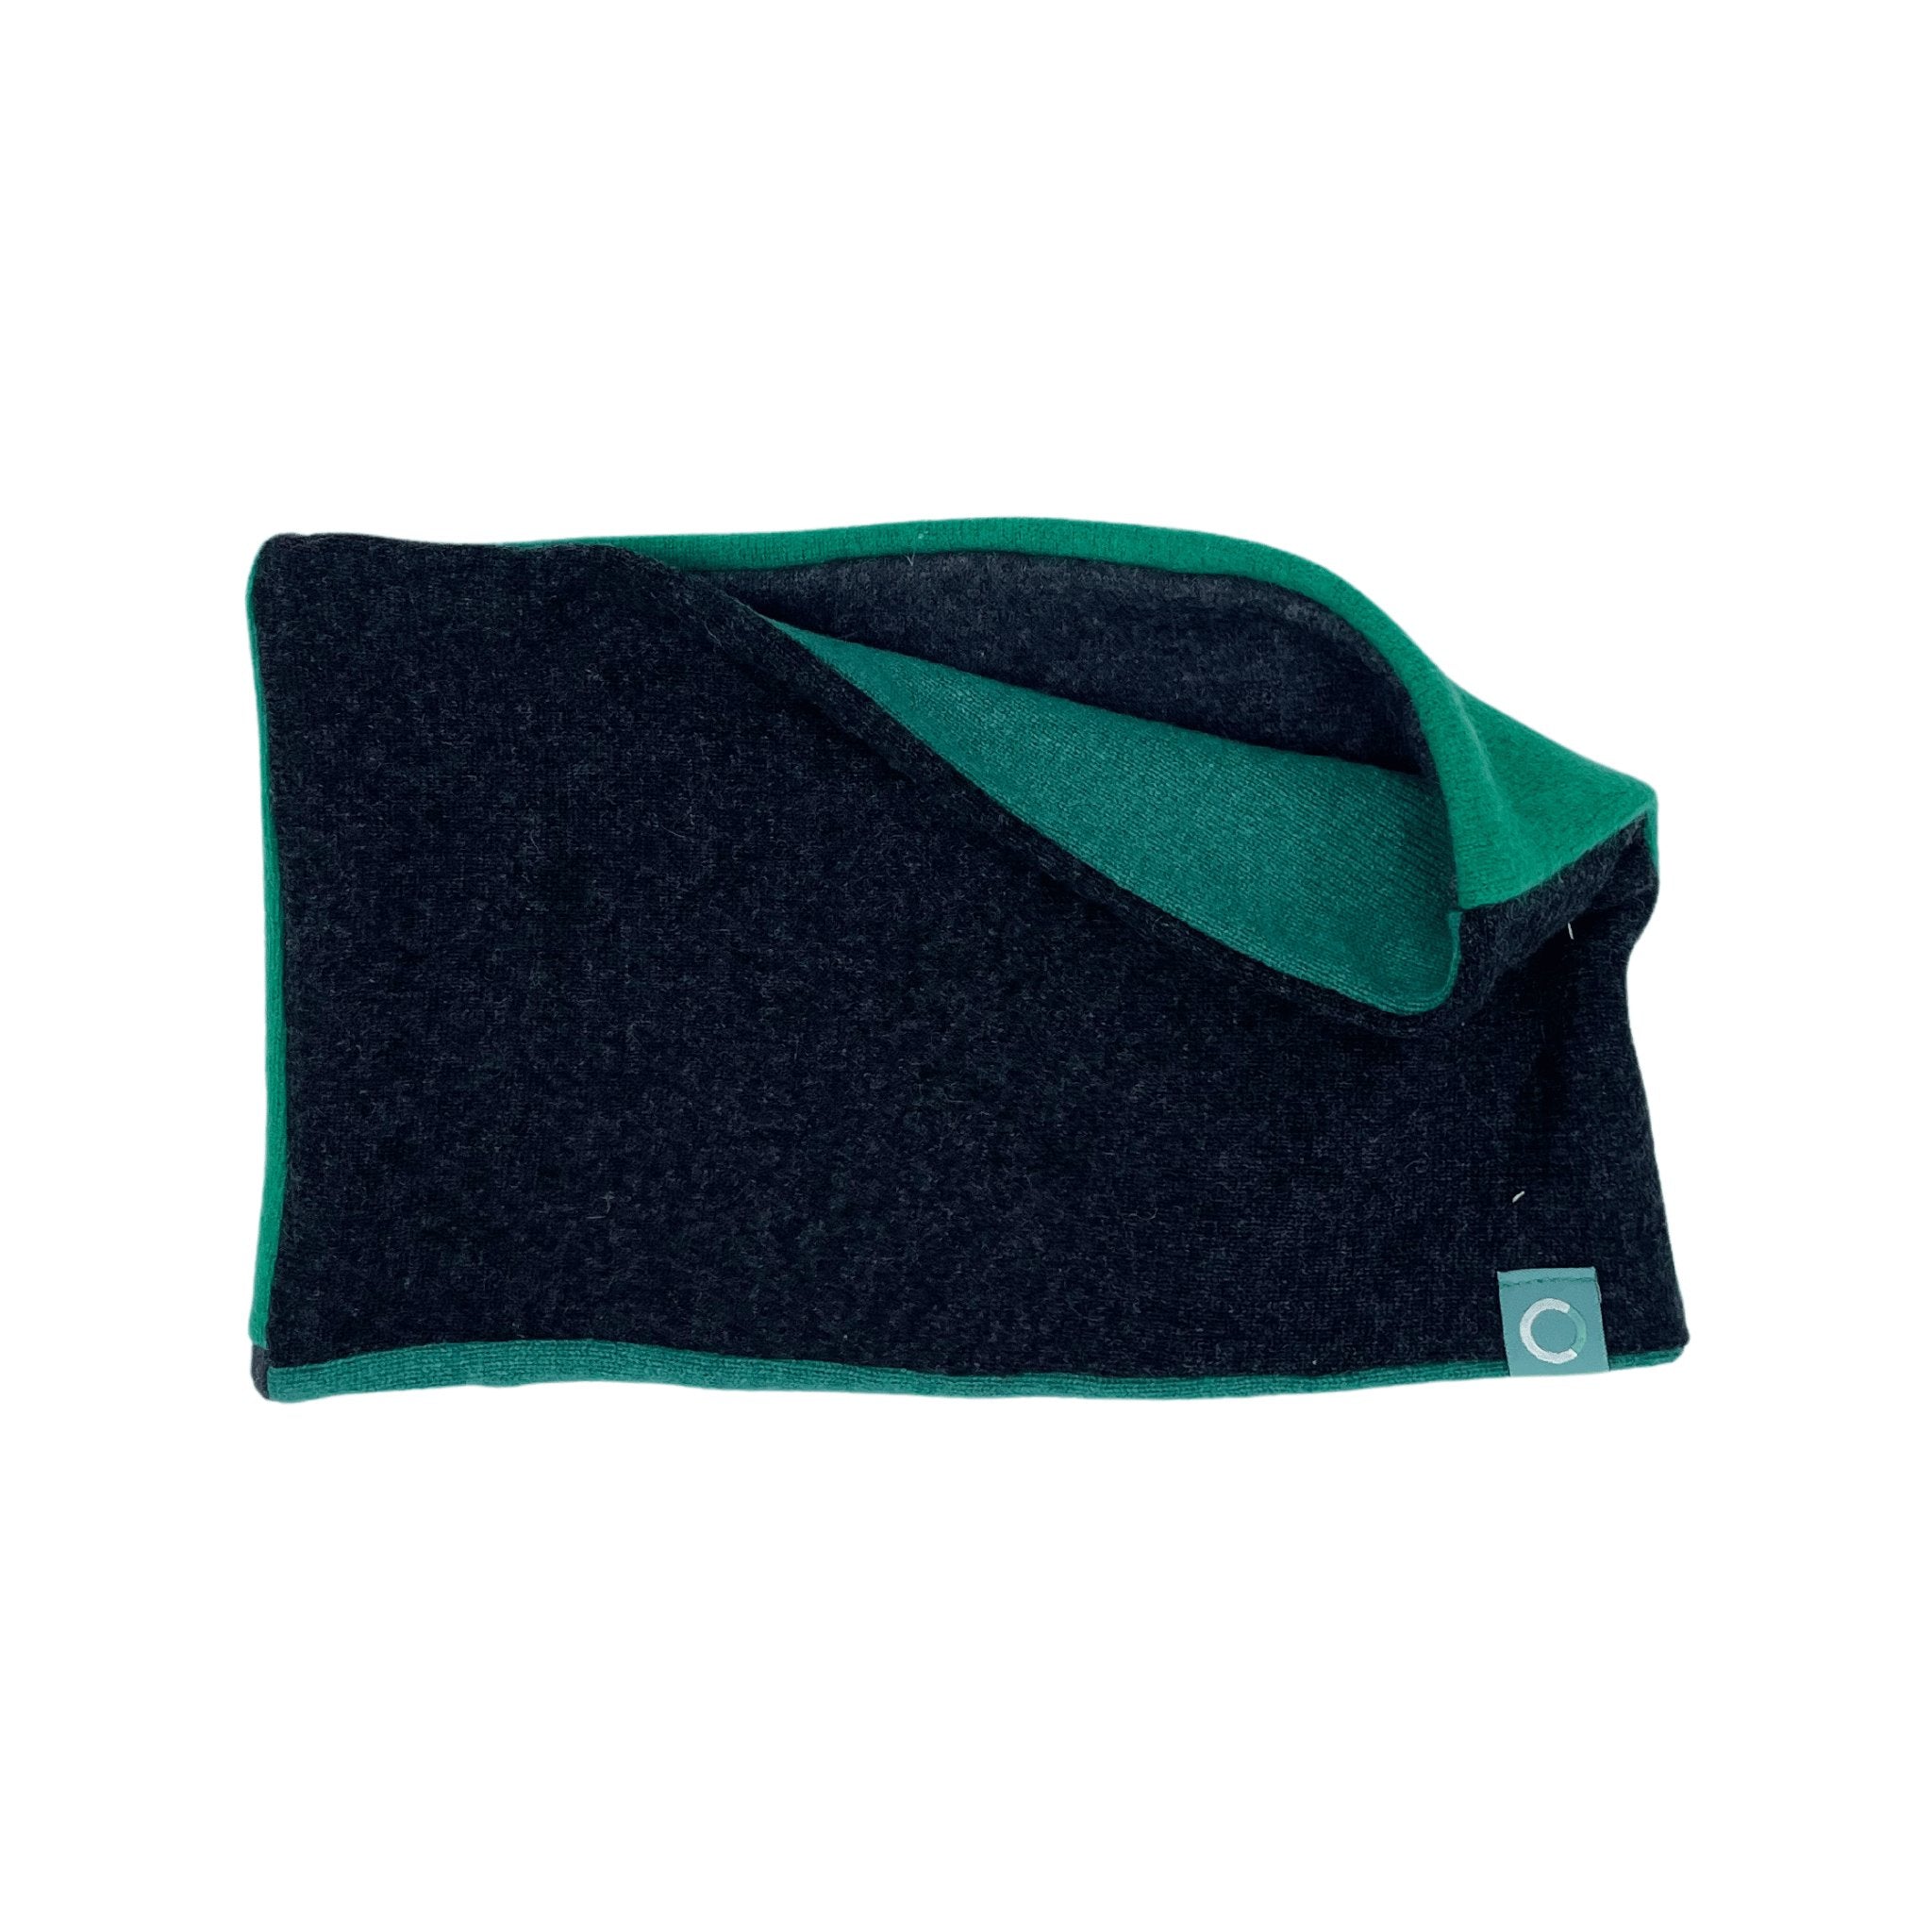 Recycled Neckwarmers | Regular - Green & Charcoal - Cashmere Circle